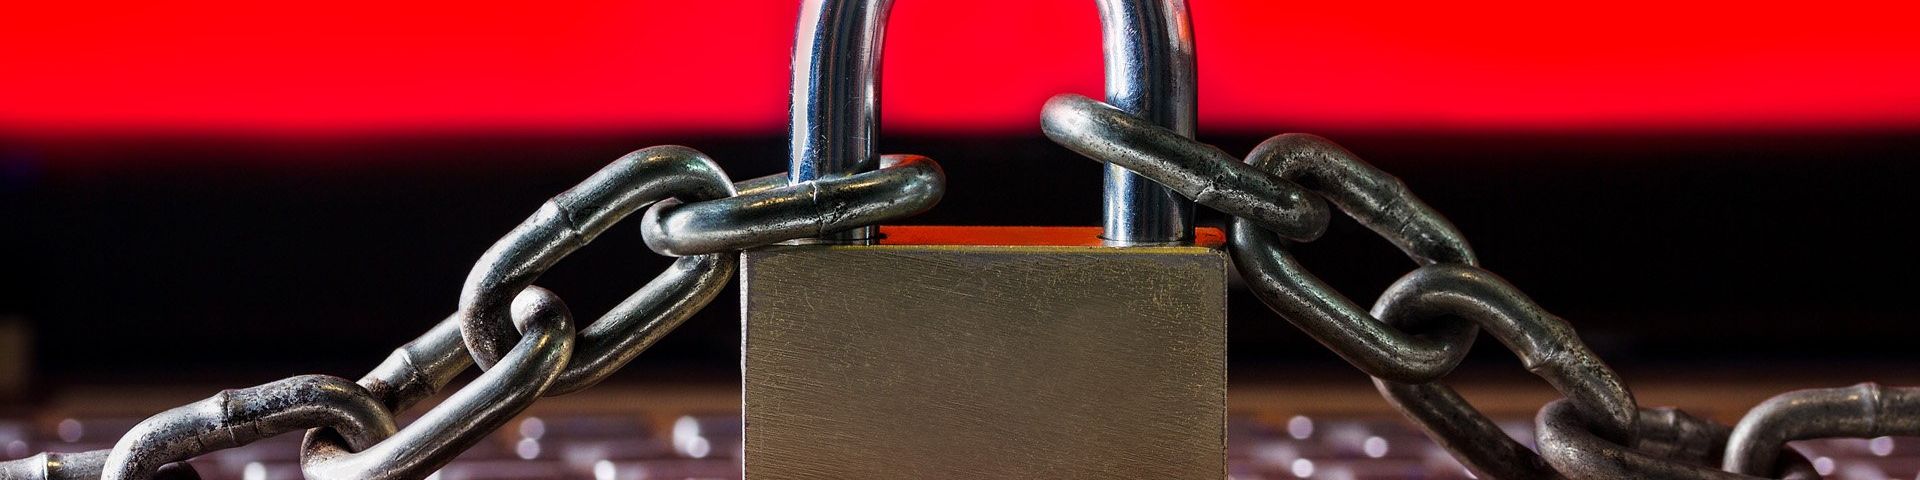 A padlock and chain on a red and black background.